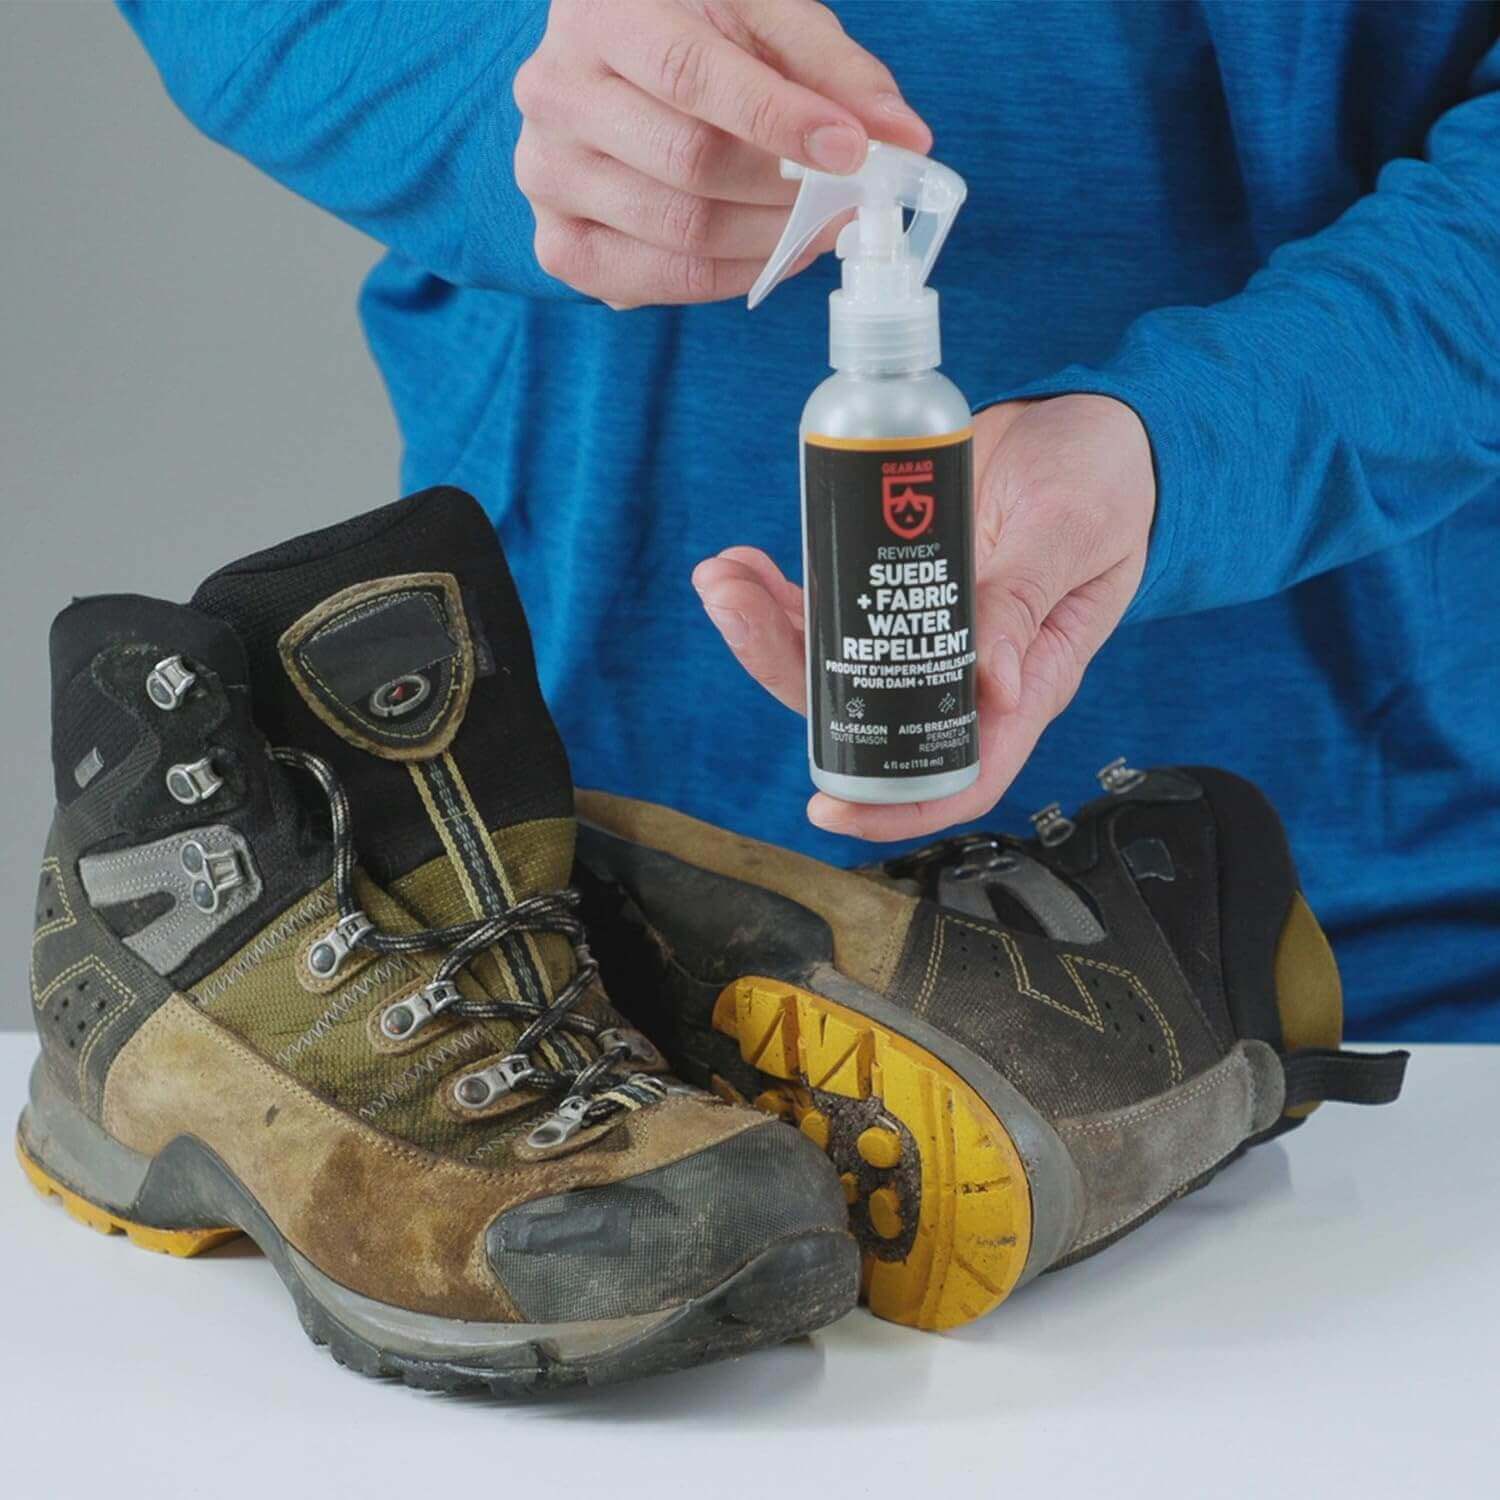 Shop The Latest >GEAR AID Revivex Suede, Nubuck Fabric Boot and Shoe Care Kit > *Only $53.99*> From The Top Brand > *Gear Aidl* > Shop Now and Get Free Shipping On Orders Over $45.00 >*Shop Earth Foot*